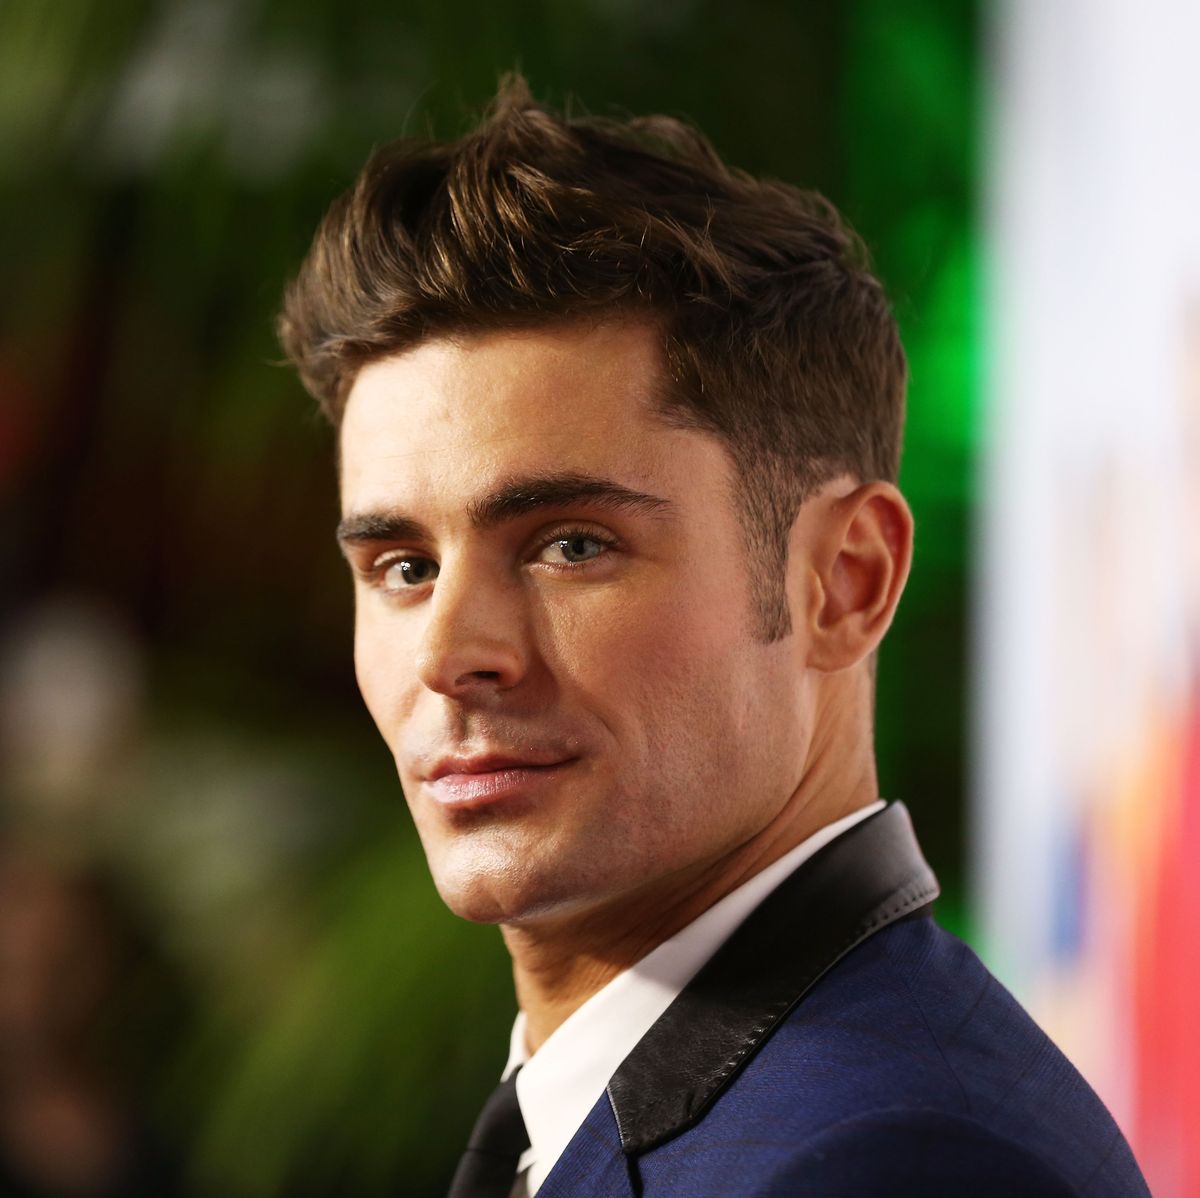 zac-efron-attends-the-australian-premiere-of-baywatch-at-news-photo-1662473014.jpg